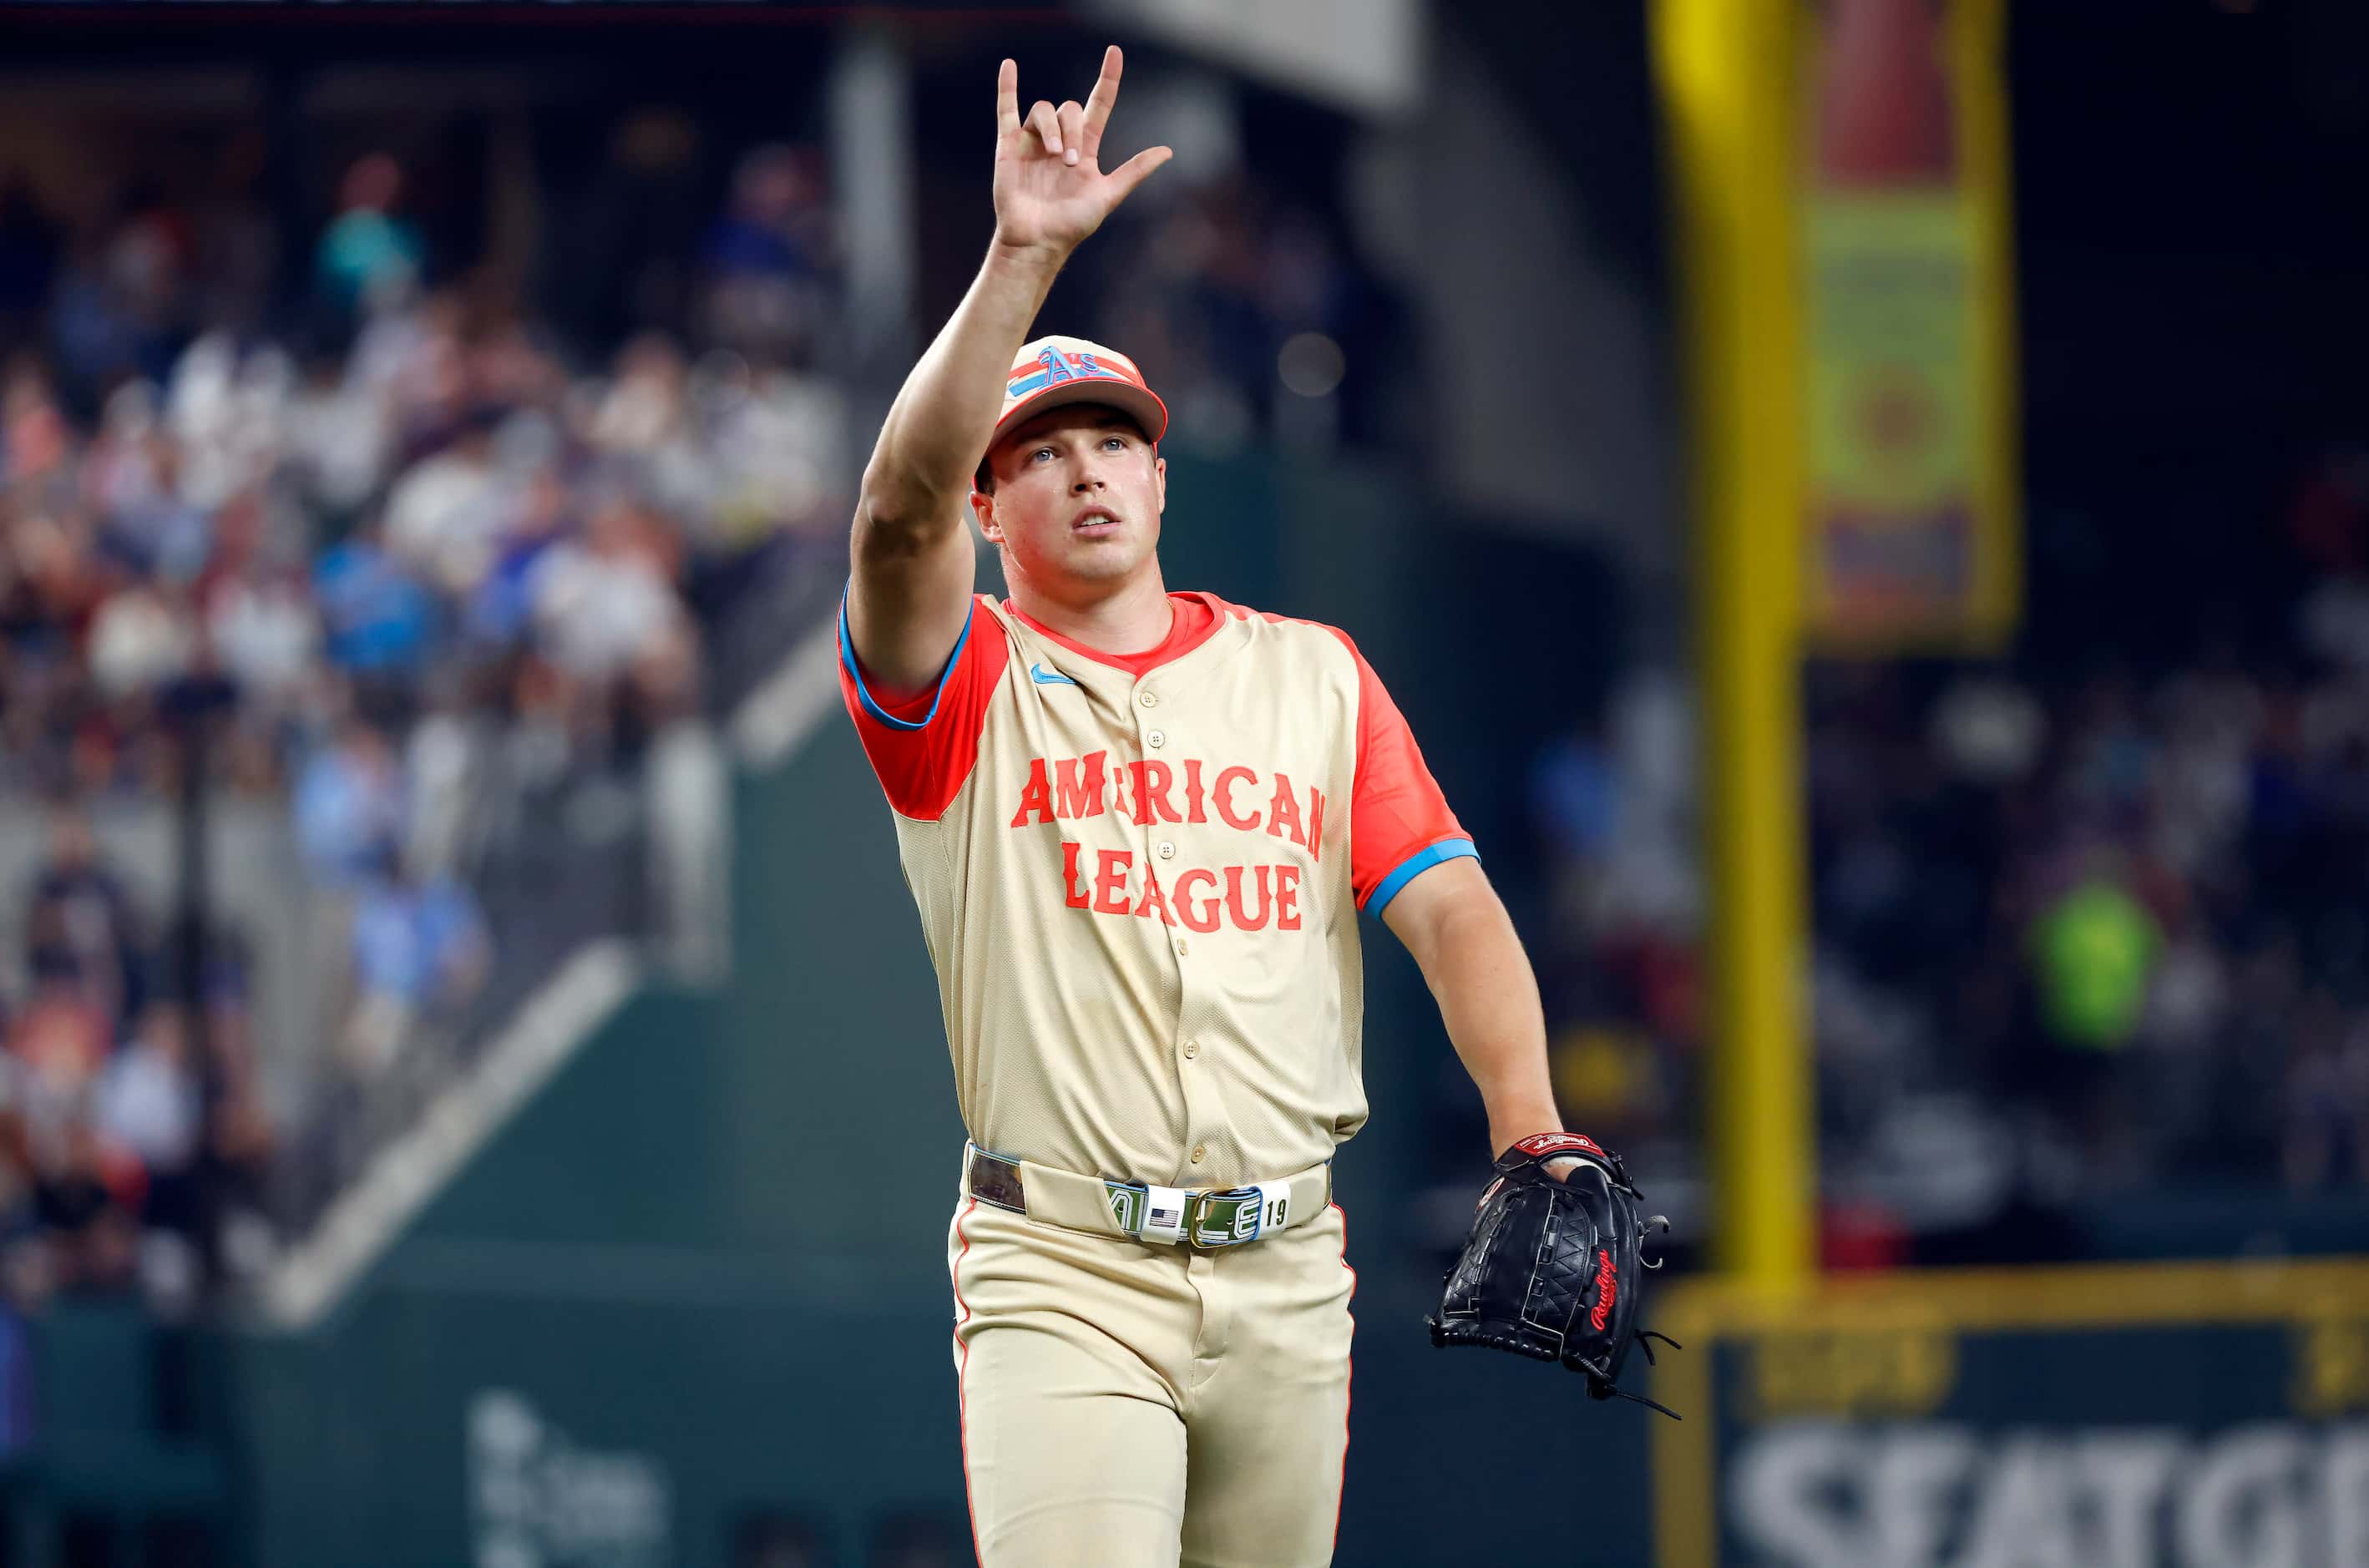 American League's Mason Miller, of the Oakland Athletics, flashes a hand sign to the crowd...